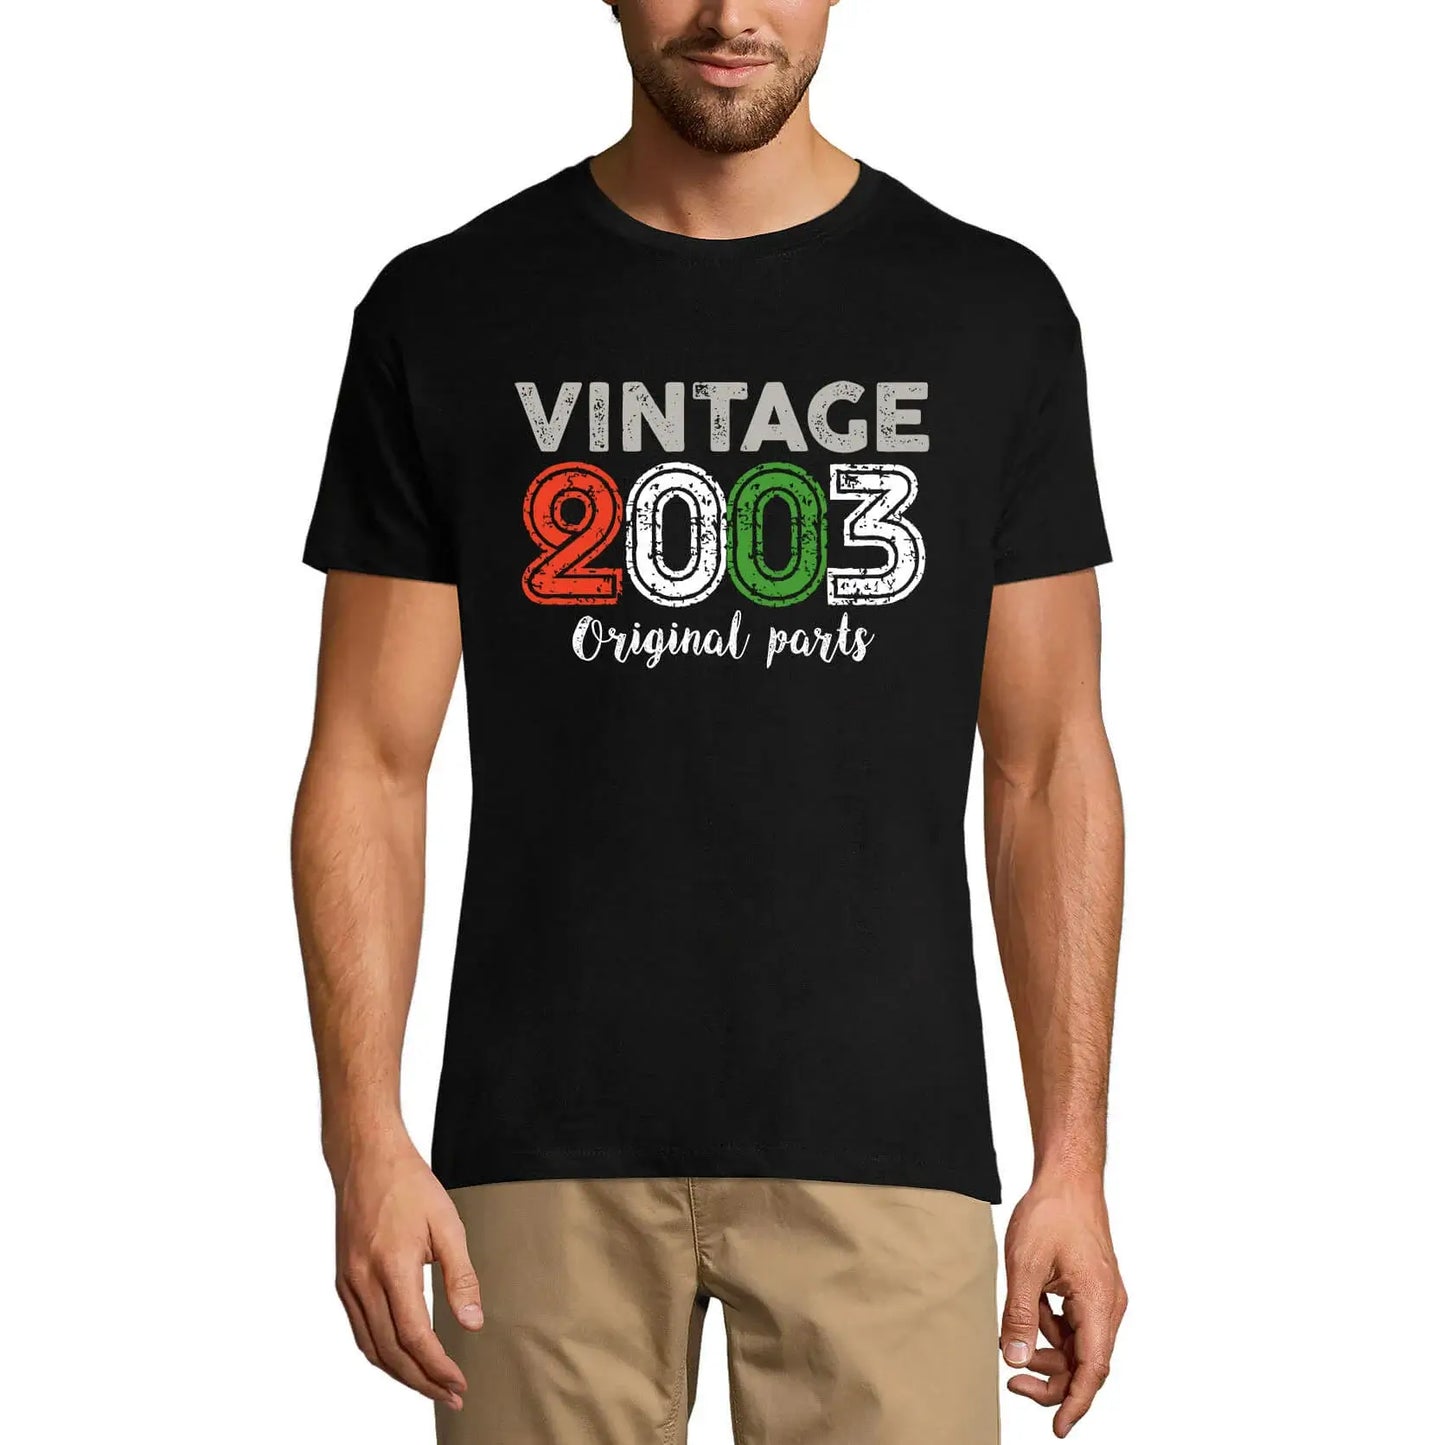 Men's Graphic T-Shirt Original Parts 2003 21st Birthday Anniversary 21 Year Old Gift 2003 Vintage Eco-Friendly Short Sleeve Novelty Tee